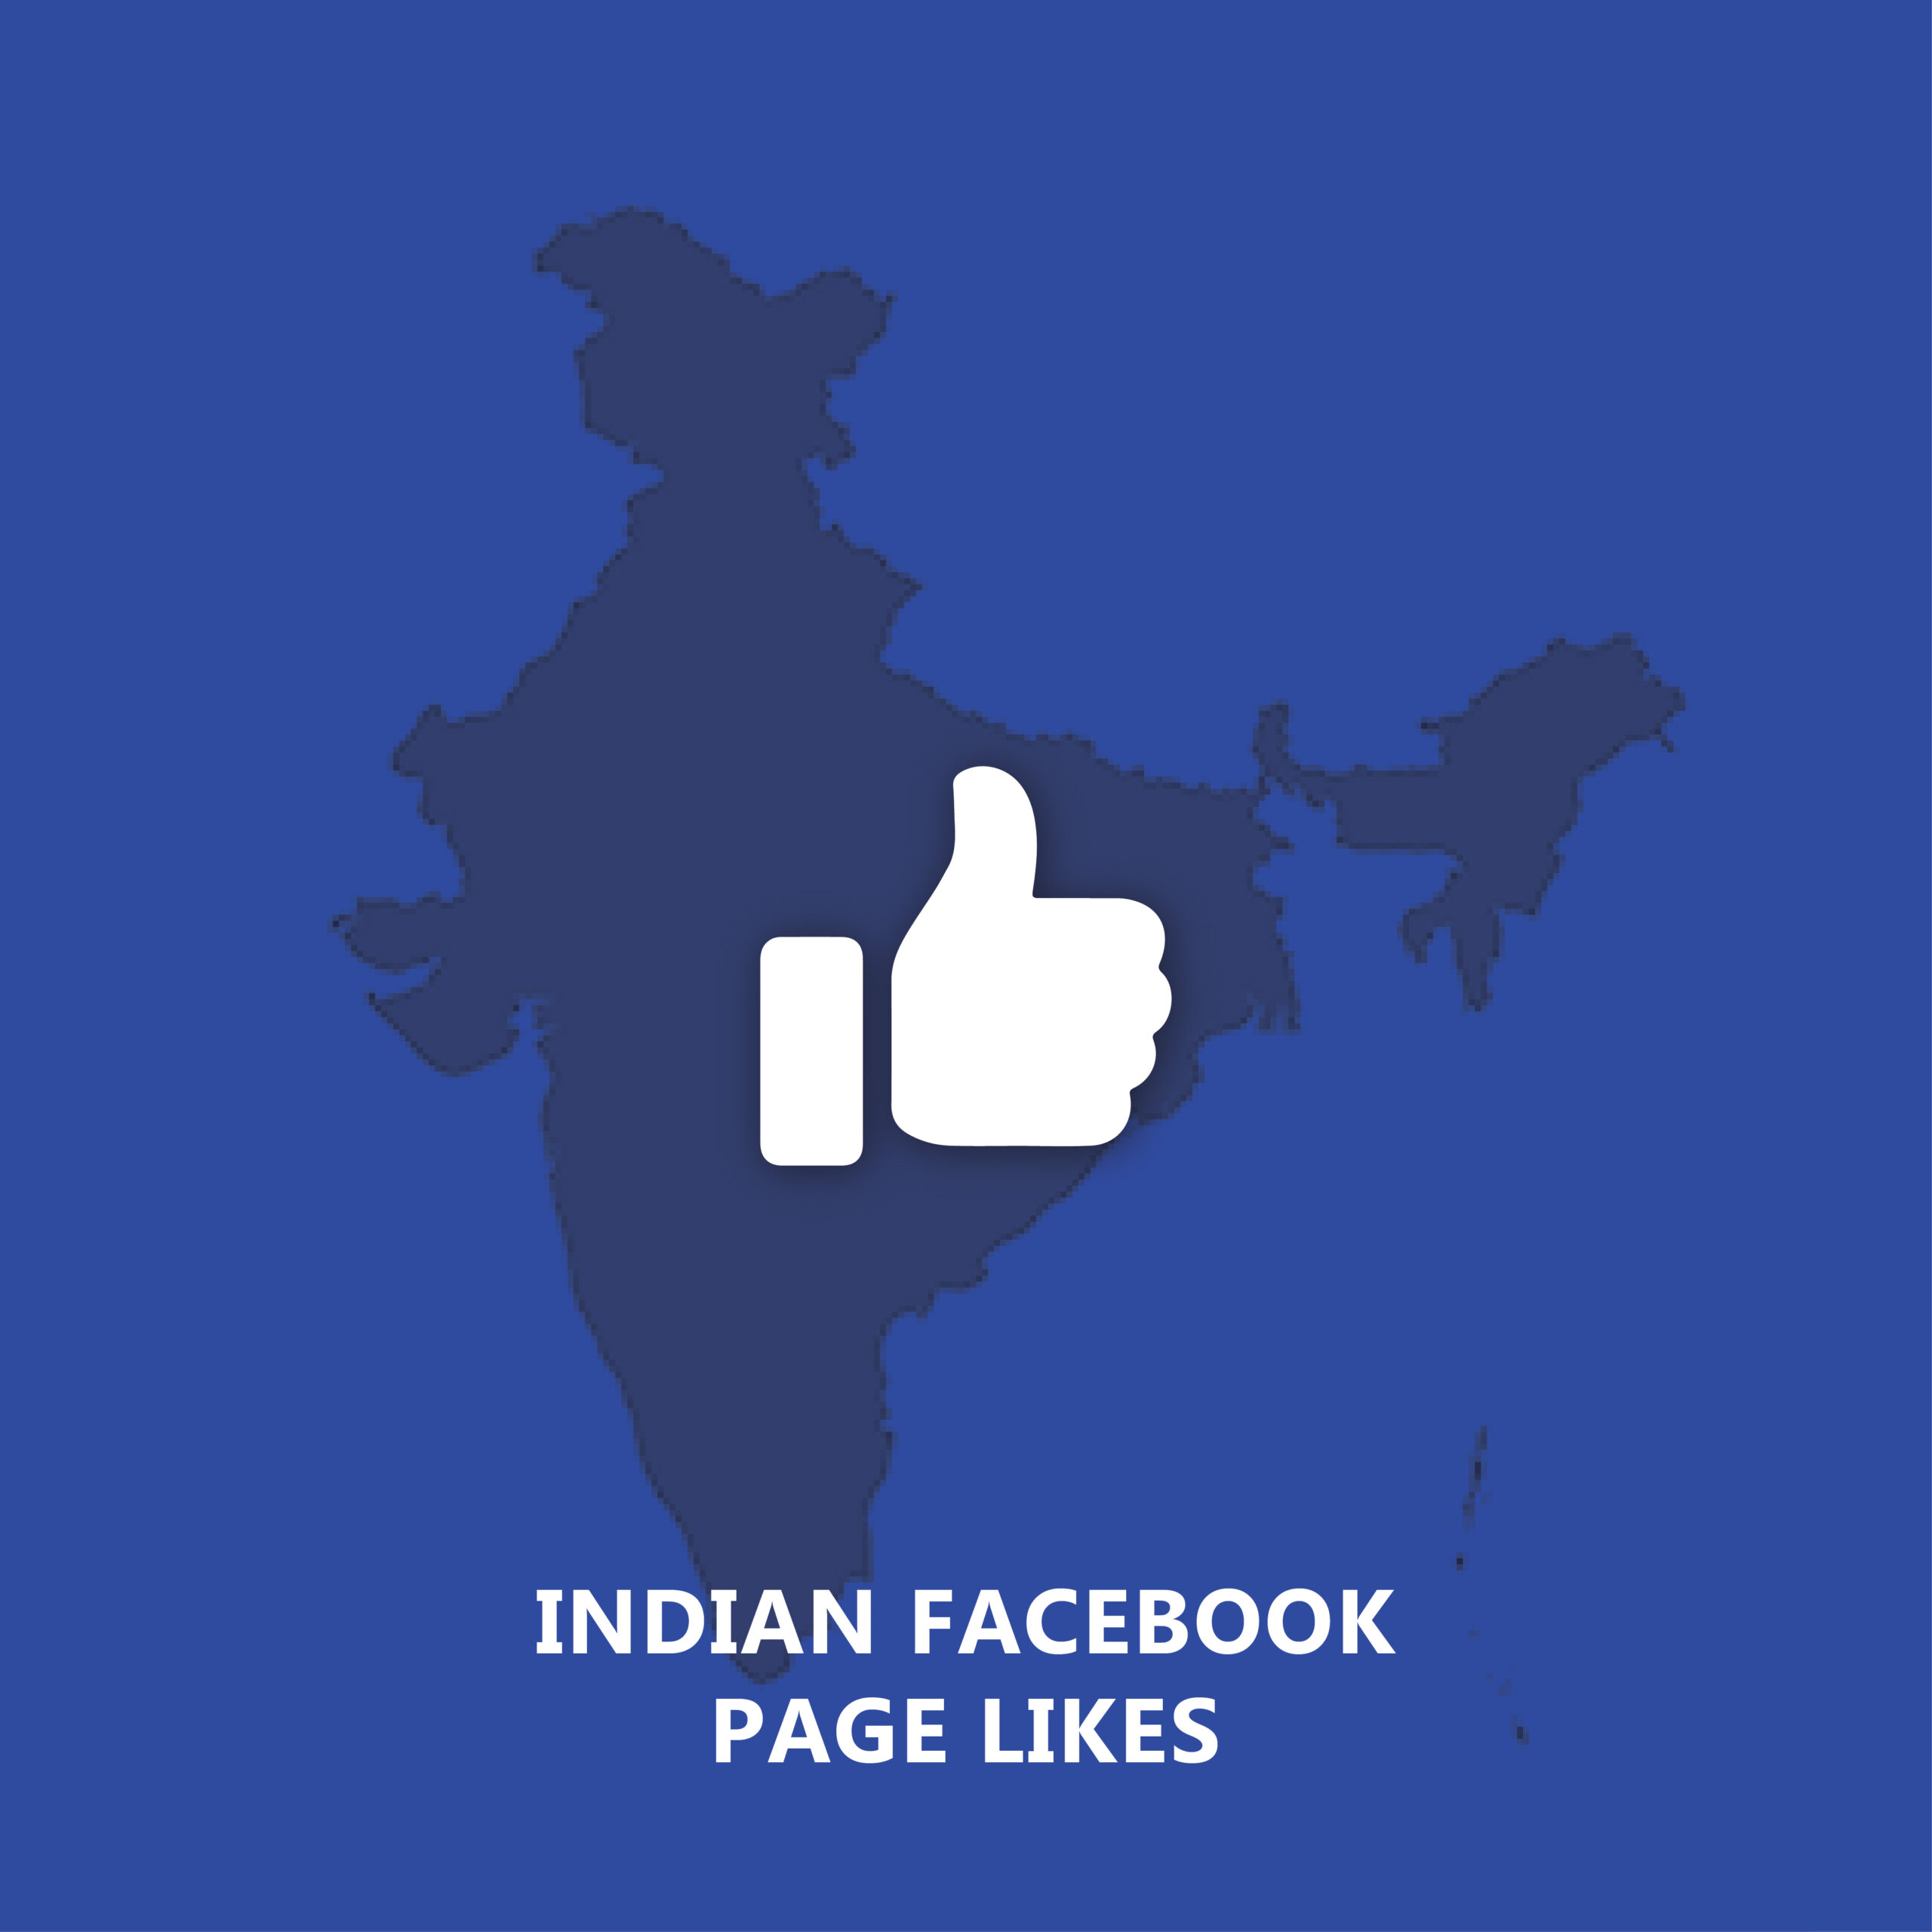 Indian Facebook Page Likes